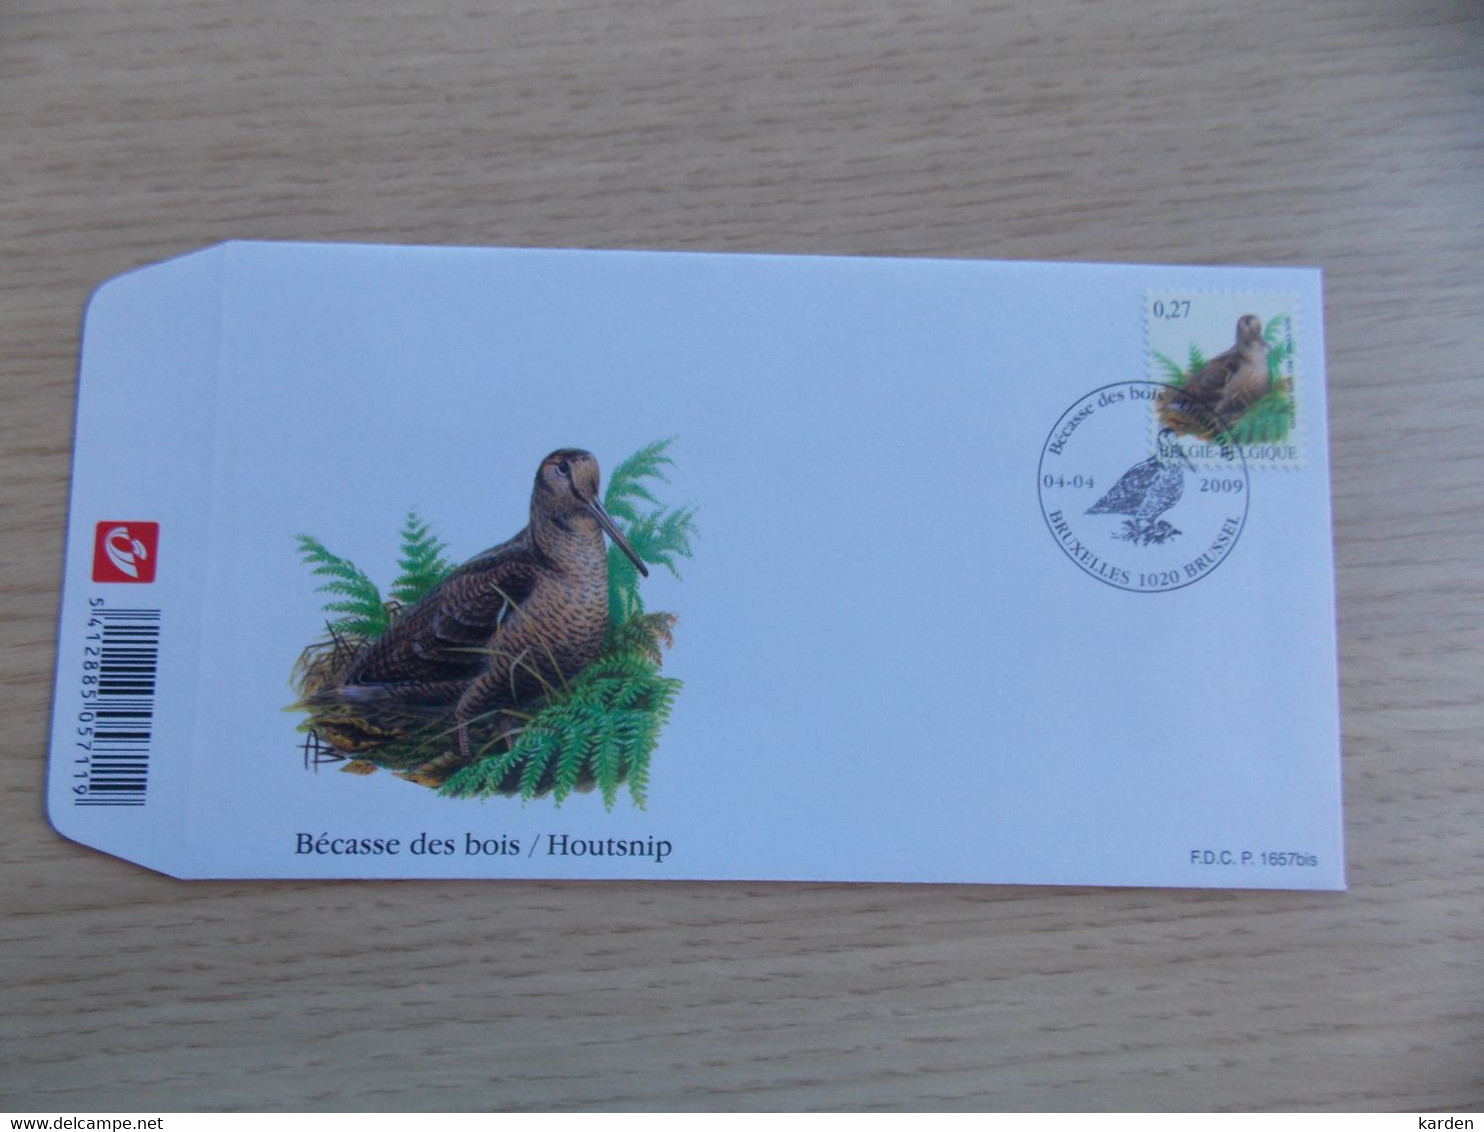 First Day Cover 2009 België Bécasse Des Bois / Houtsnip    FDC P 1657 Bis - 2001-2010